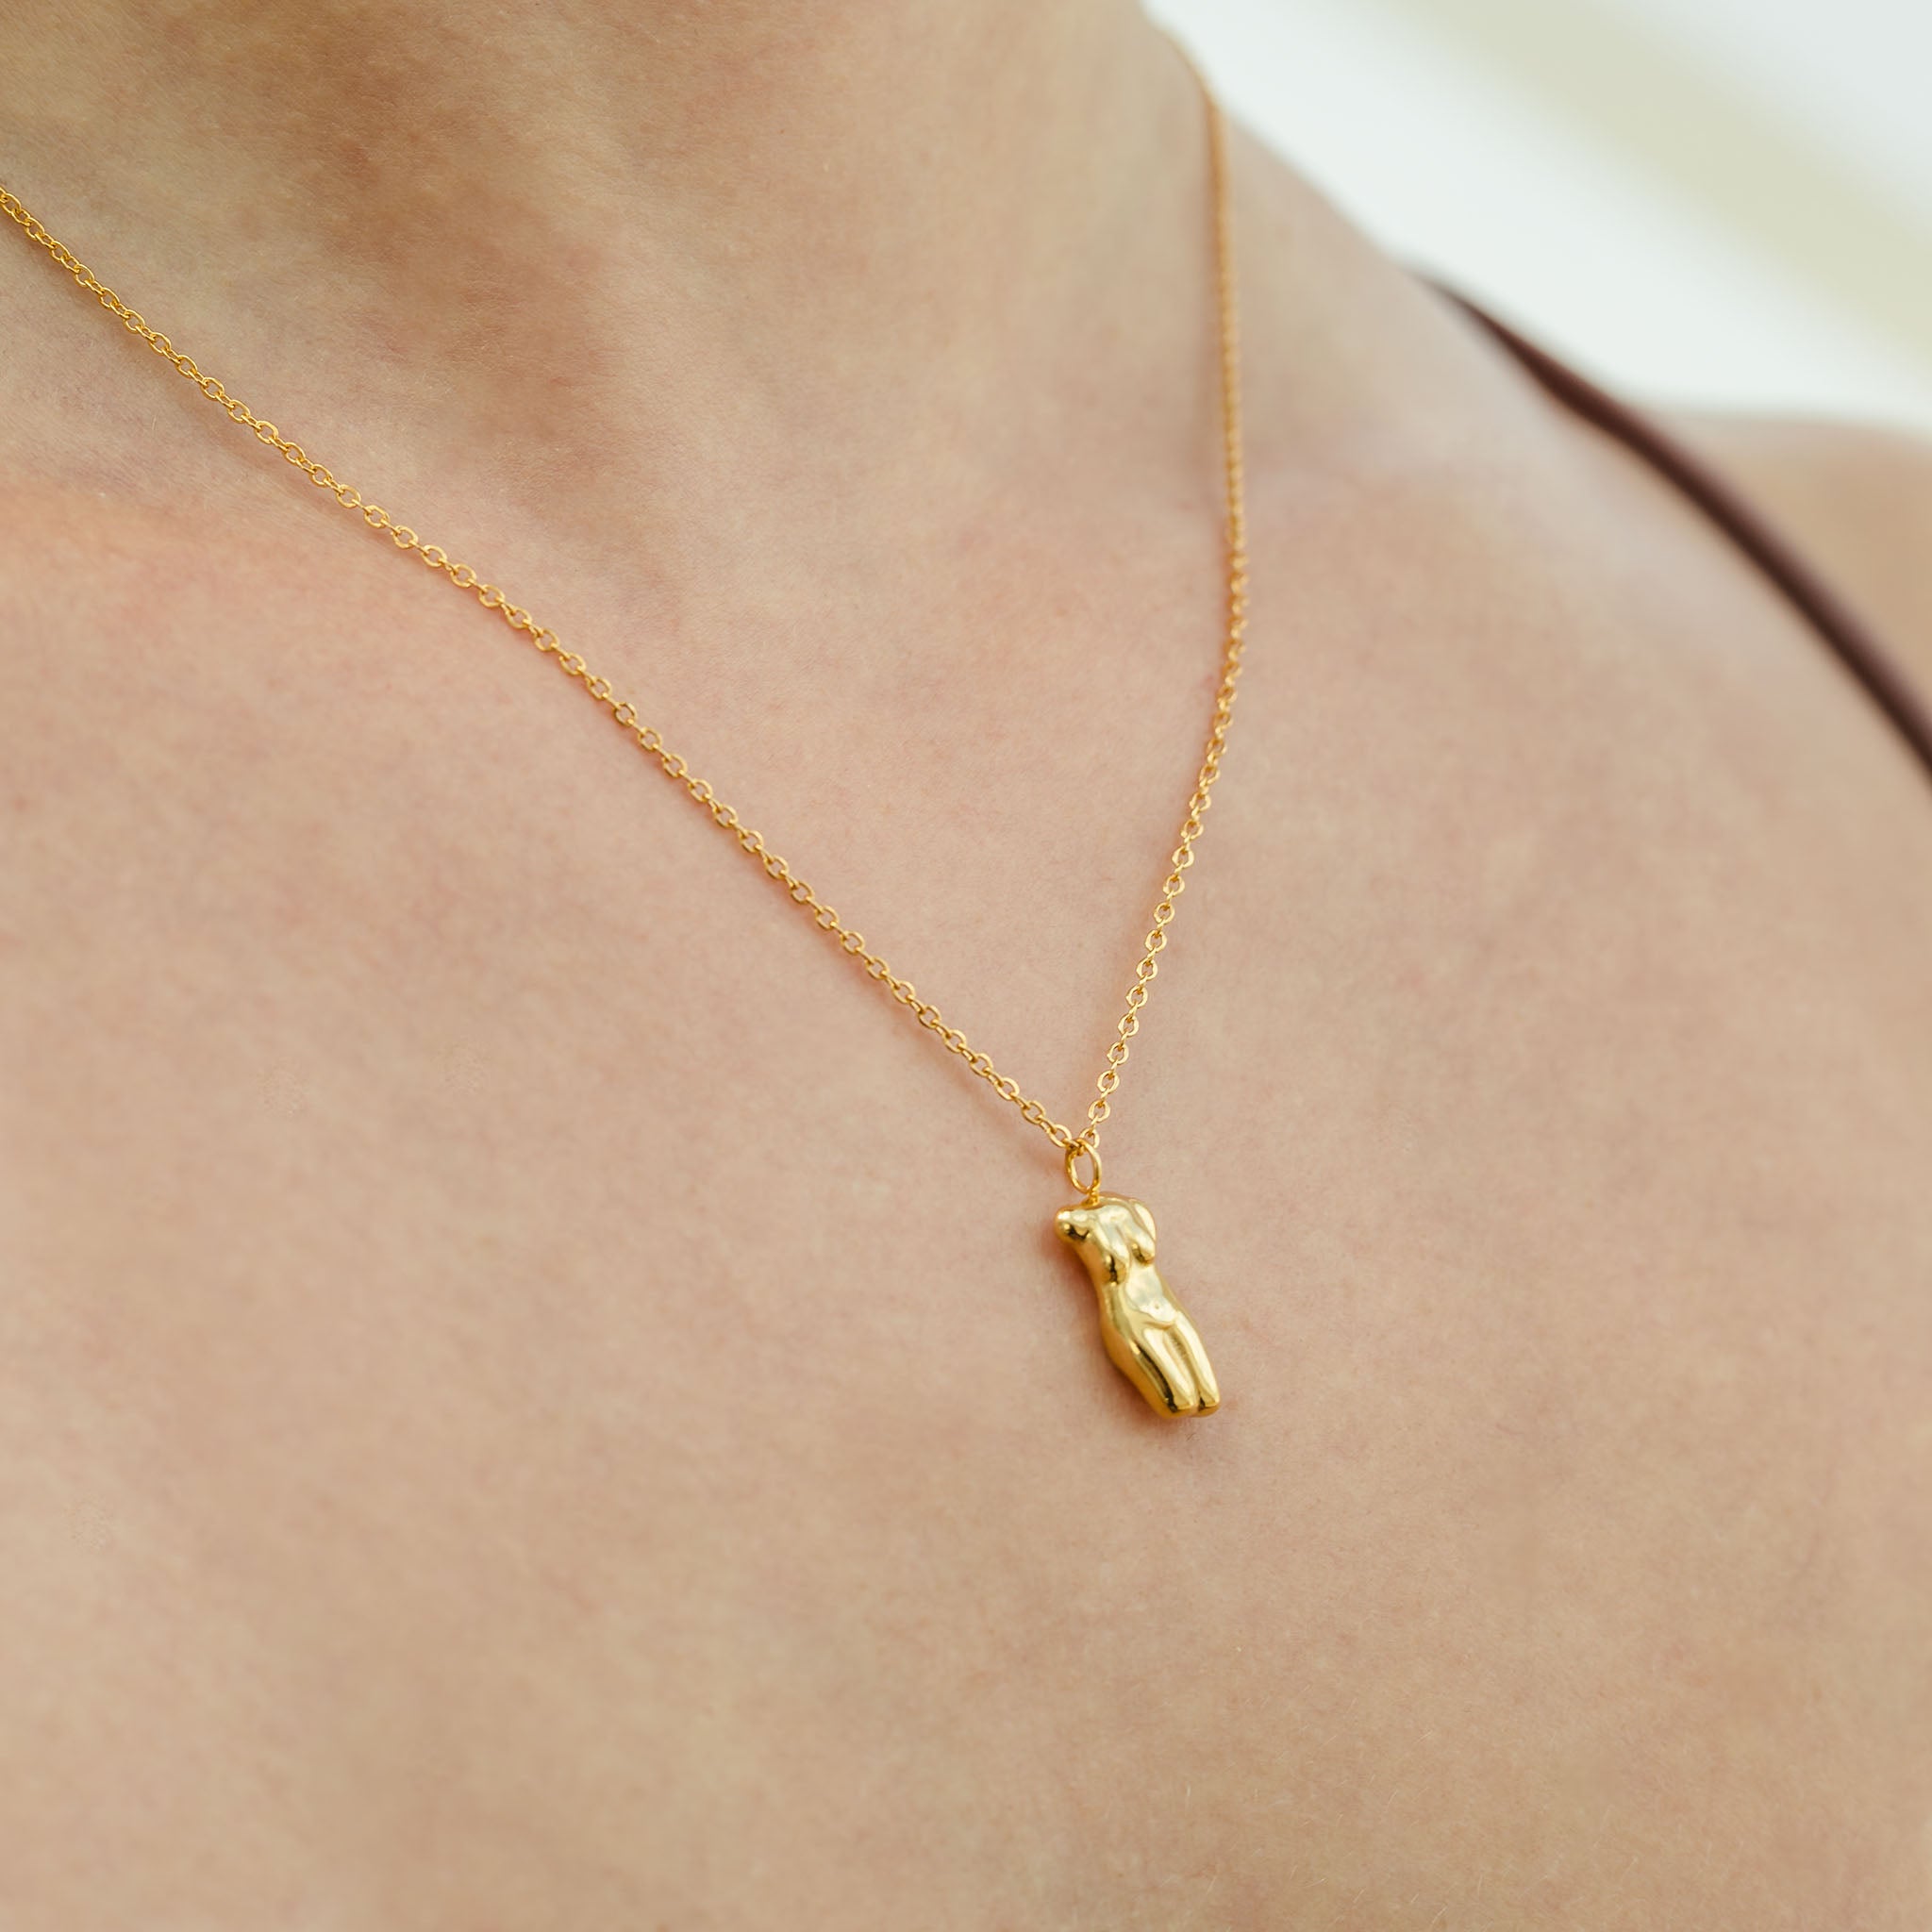 Golden Body Necklace